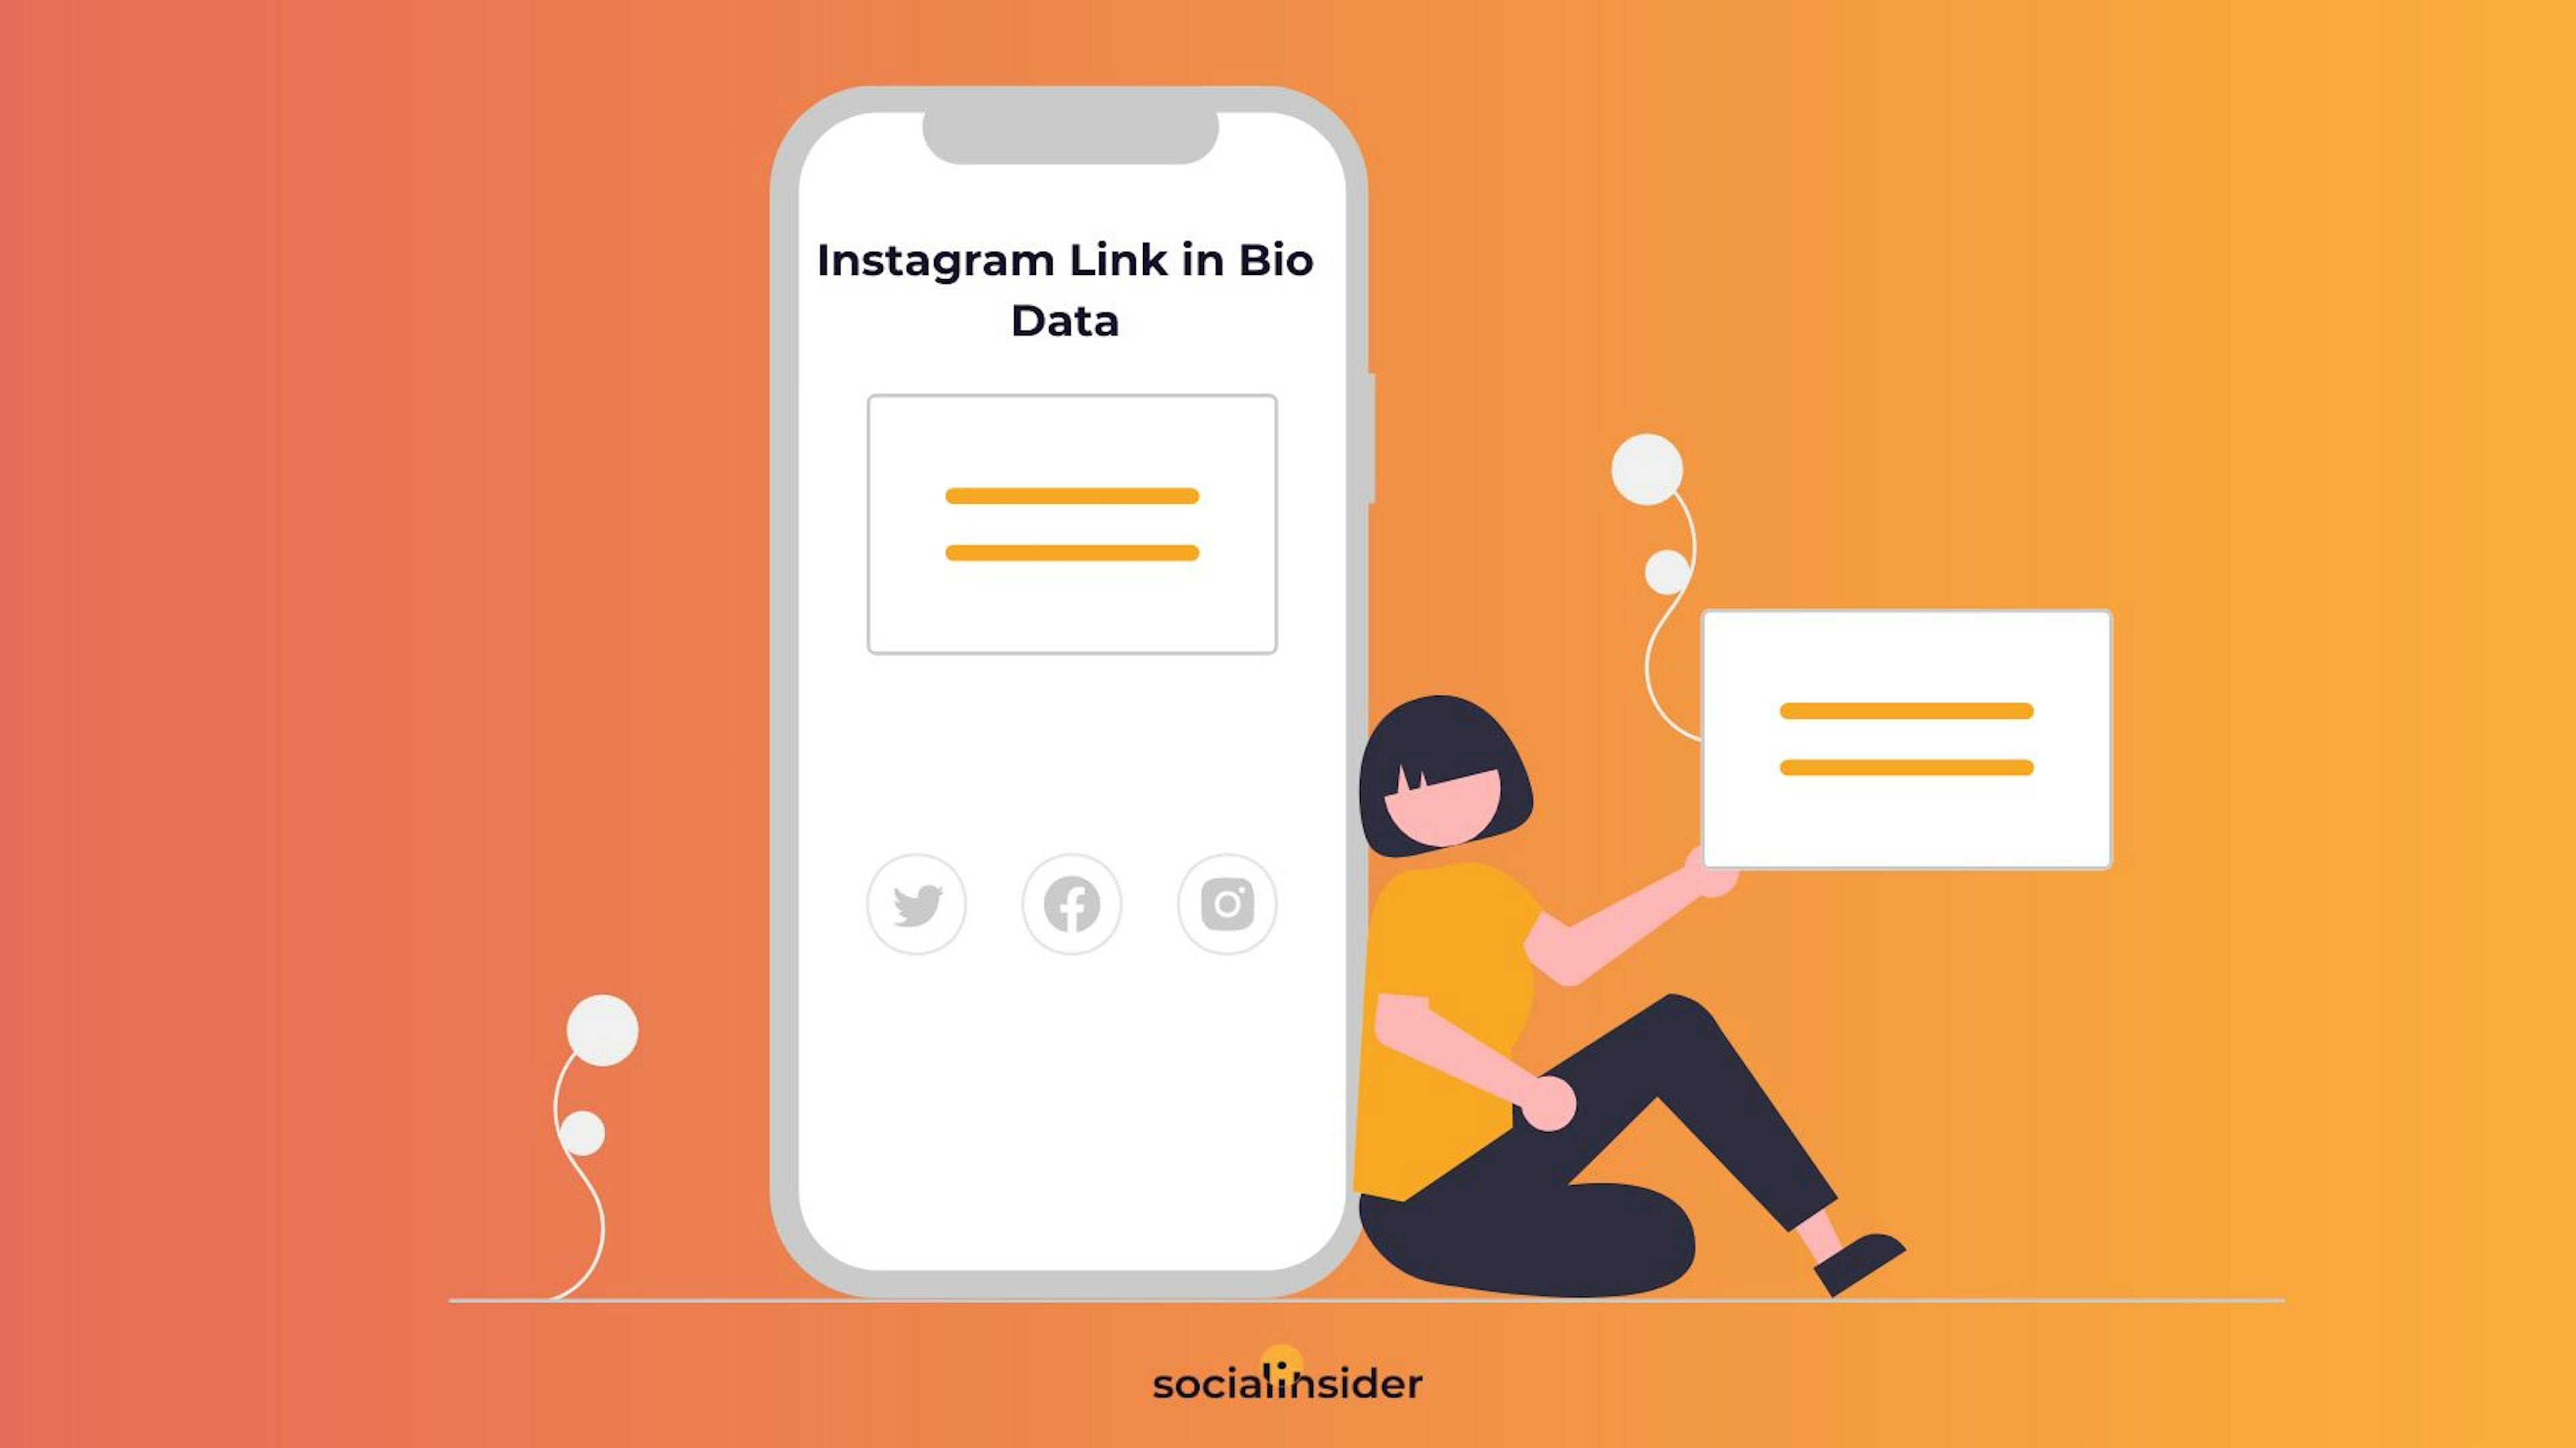 featured image - What Is the Relationship Between Instagram Link in Bio and Engagement?